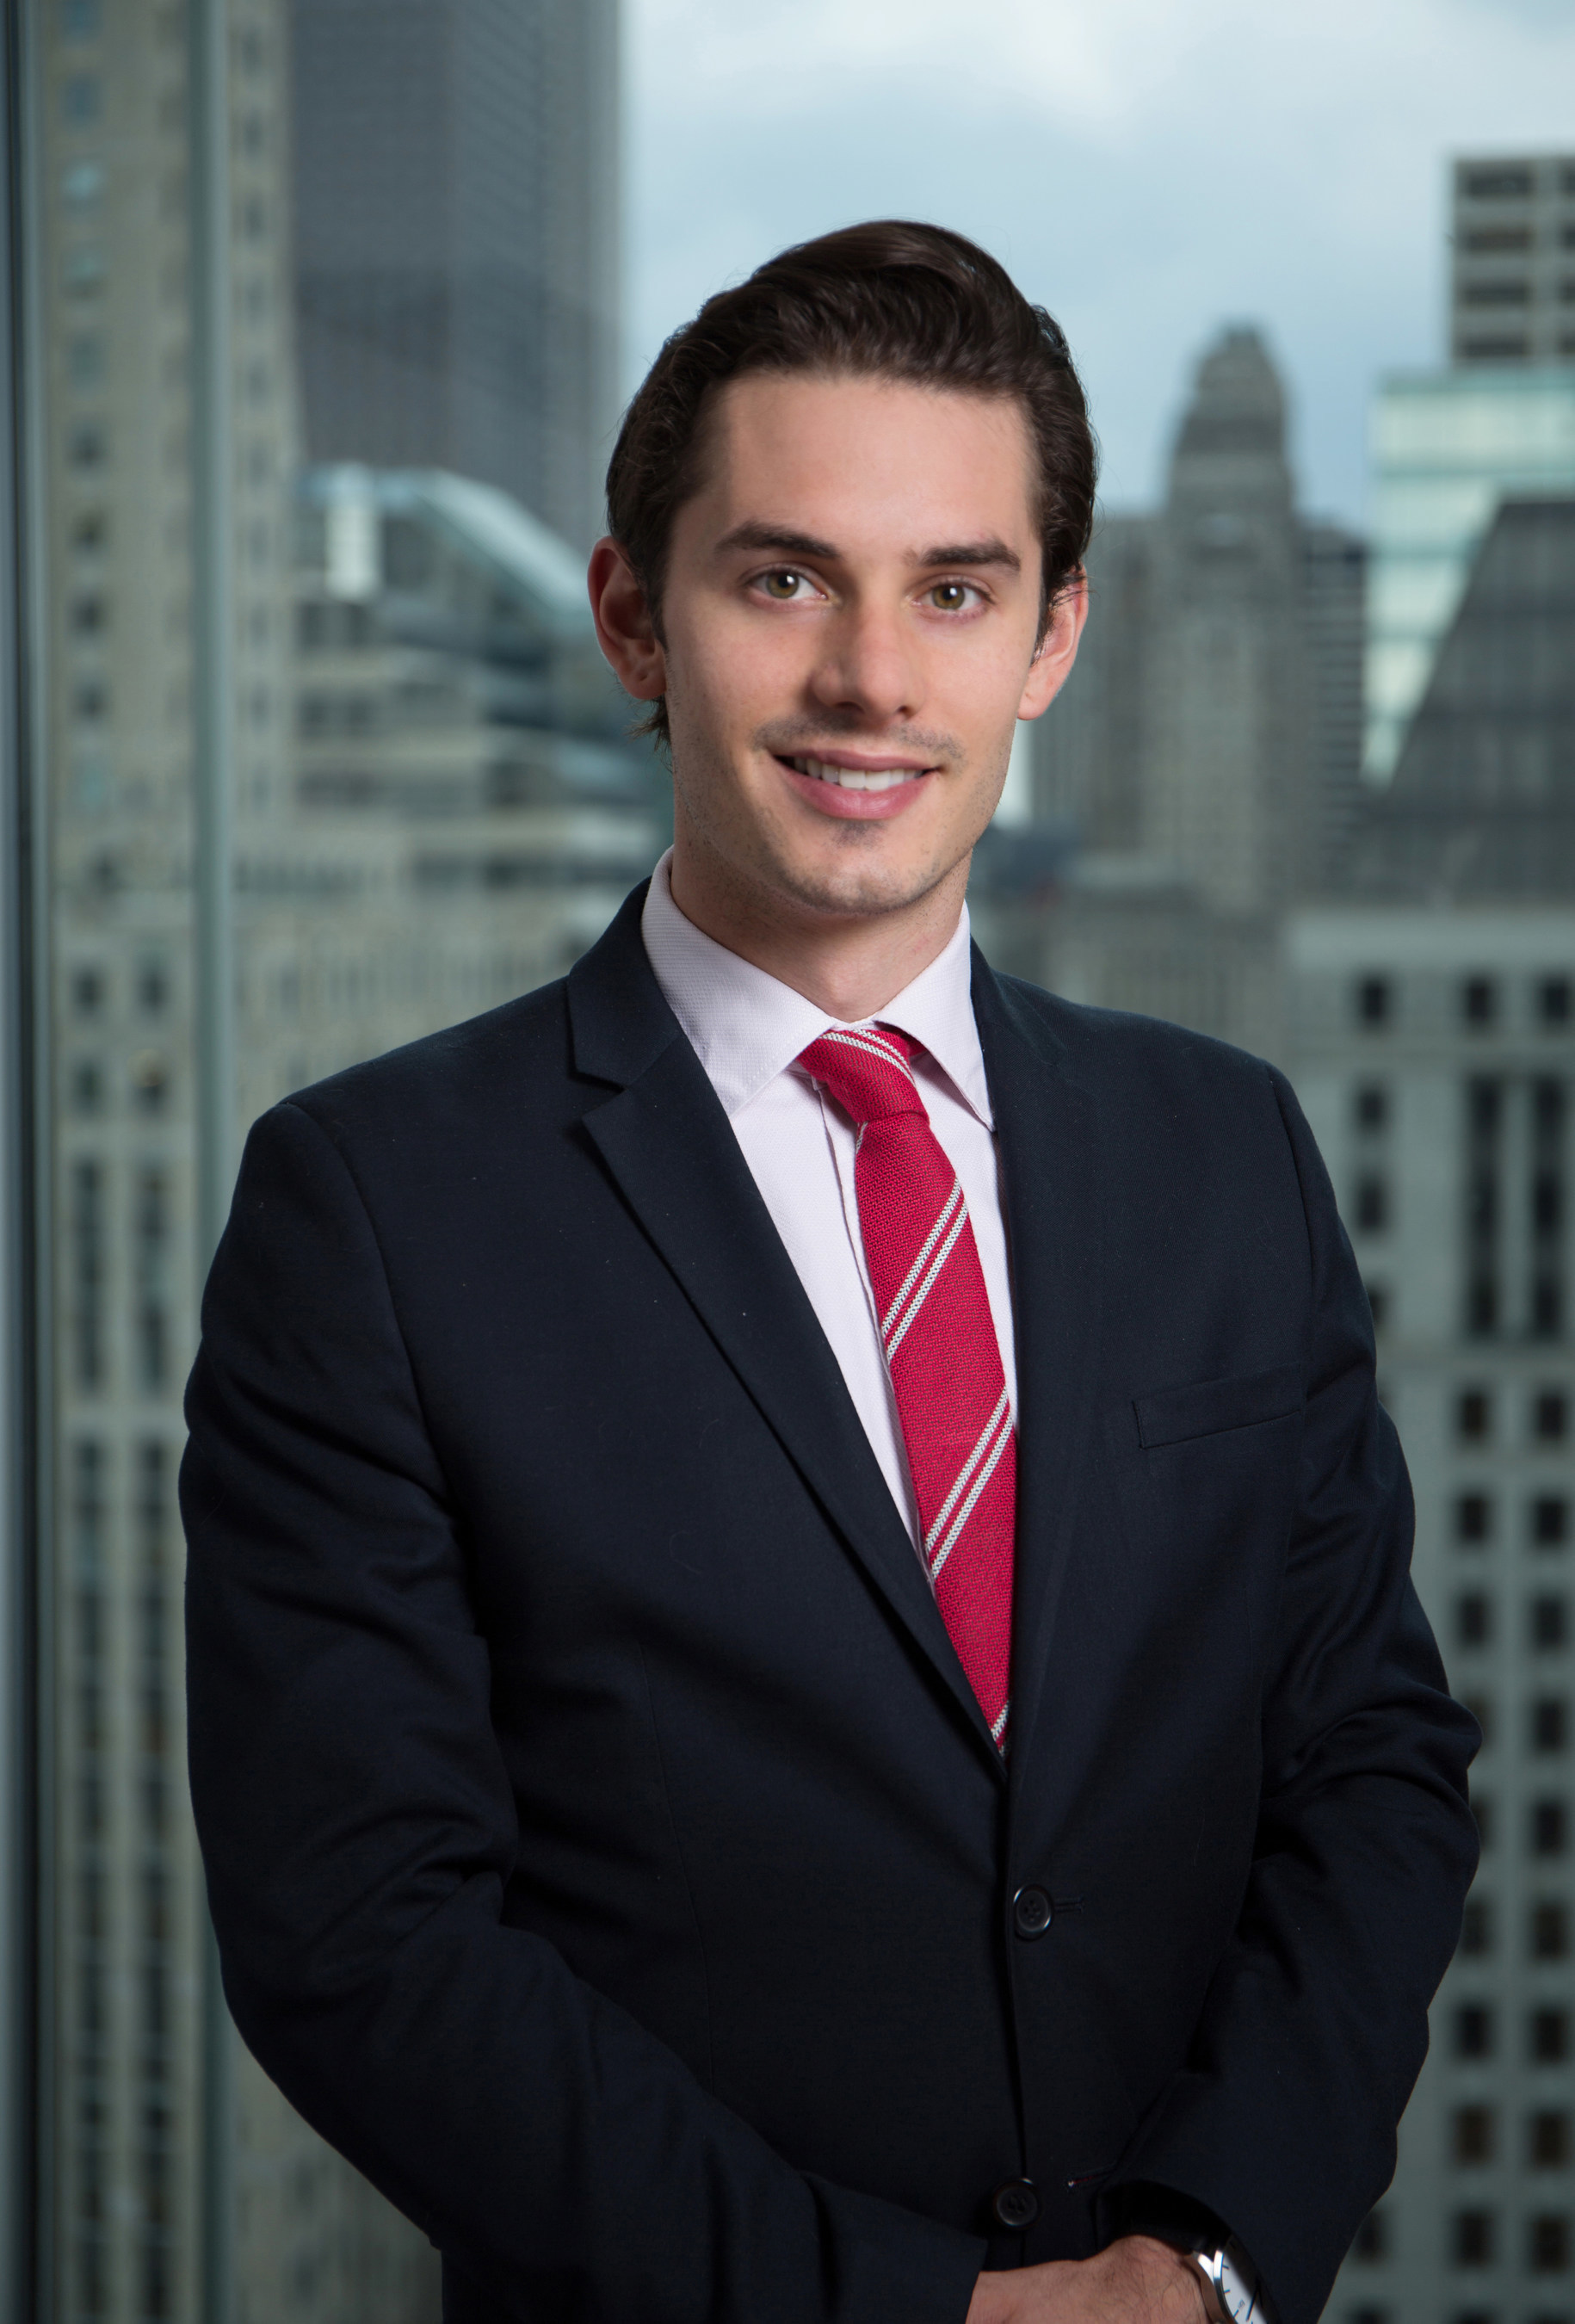 Attorney James Theo joins the Chicago office of McDonald Hopkins